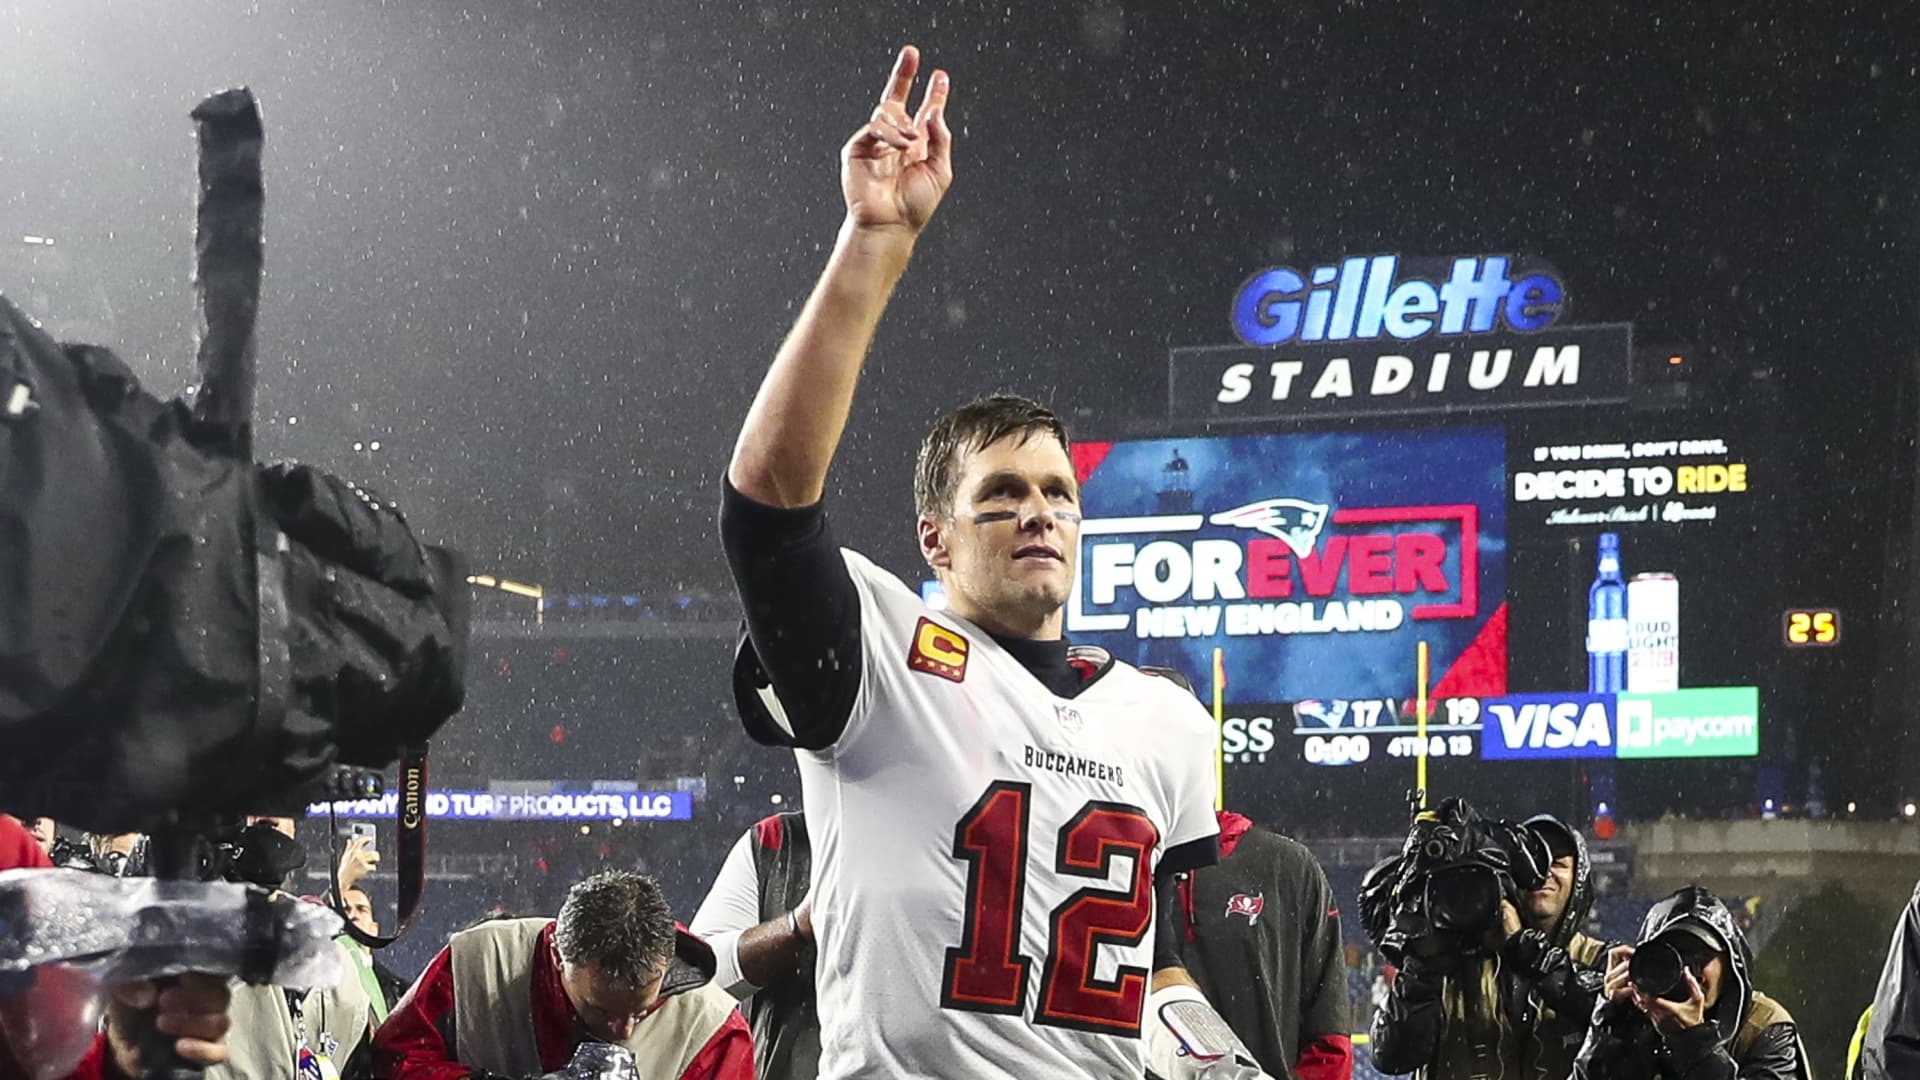 Tom Brady #12 of the Tampa Bay Buccaneers waves to the crowd as he runs off the field after defeating the New England Patriots in the game at Gillette Stadium on October 03, 2021 in Foxborough, Massachusetts.